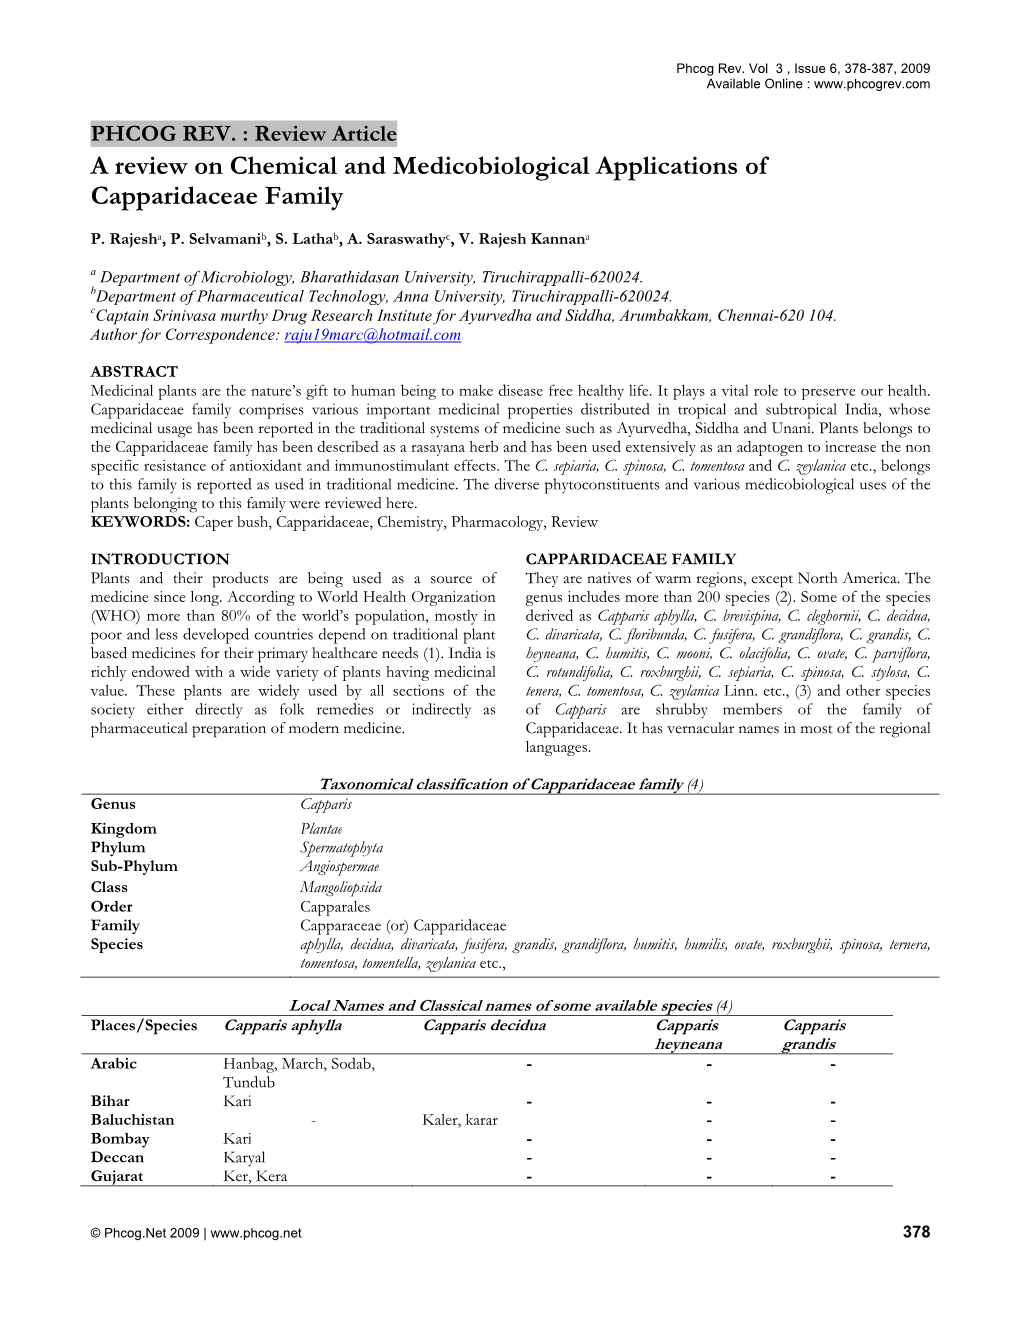 A Review on Chemical and Medicobiological Applications of Capparidaceae Family